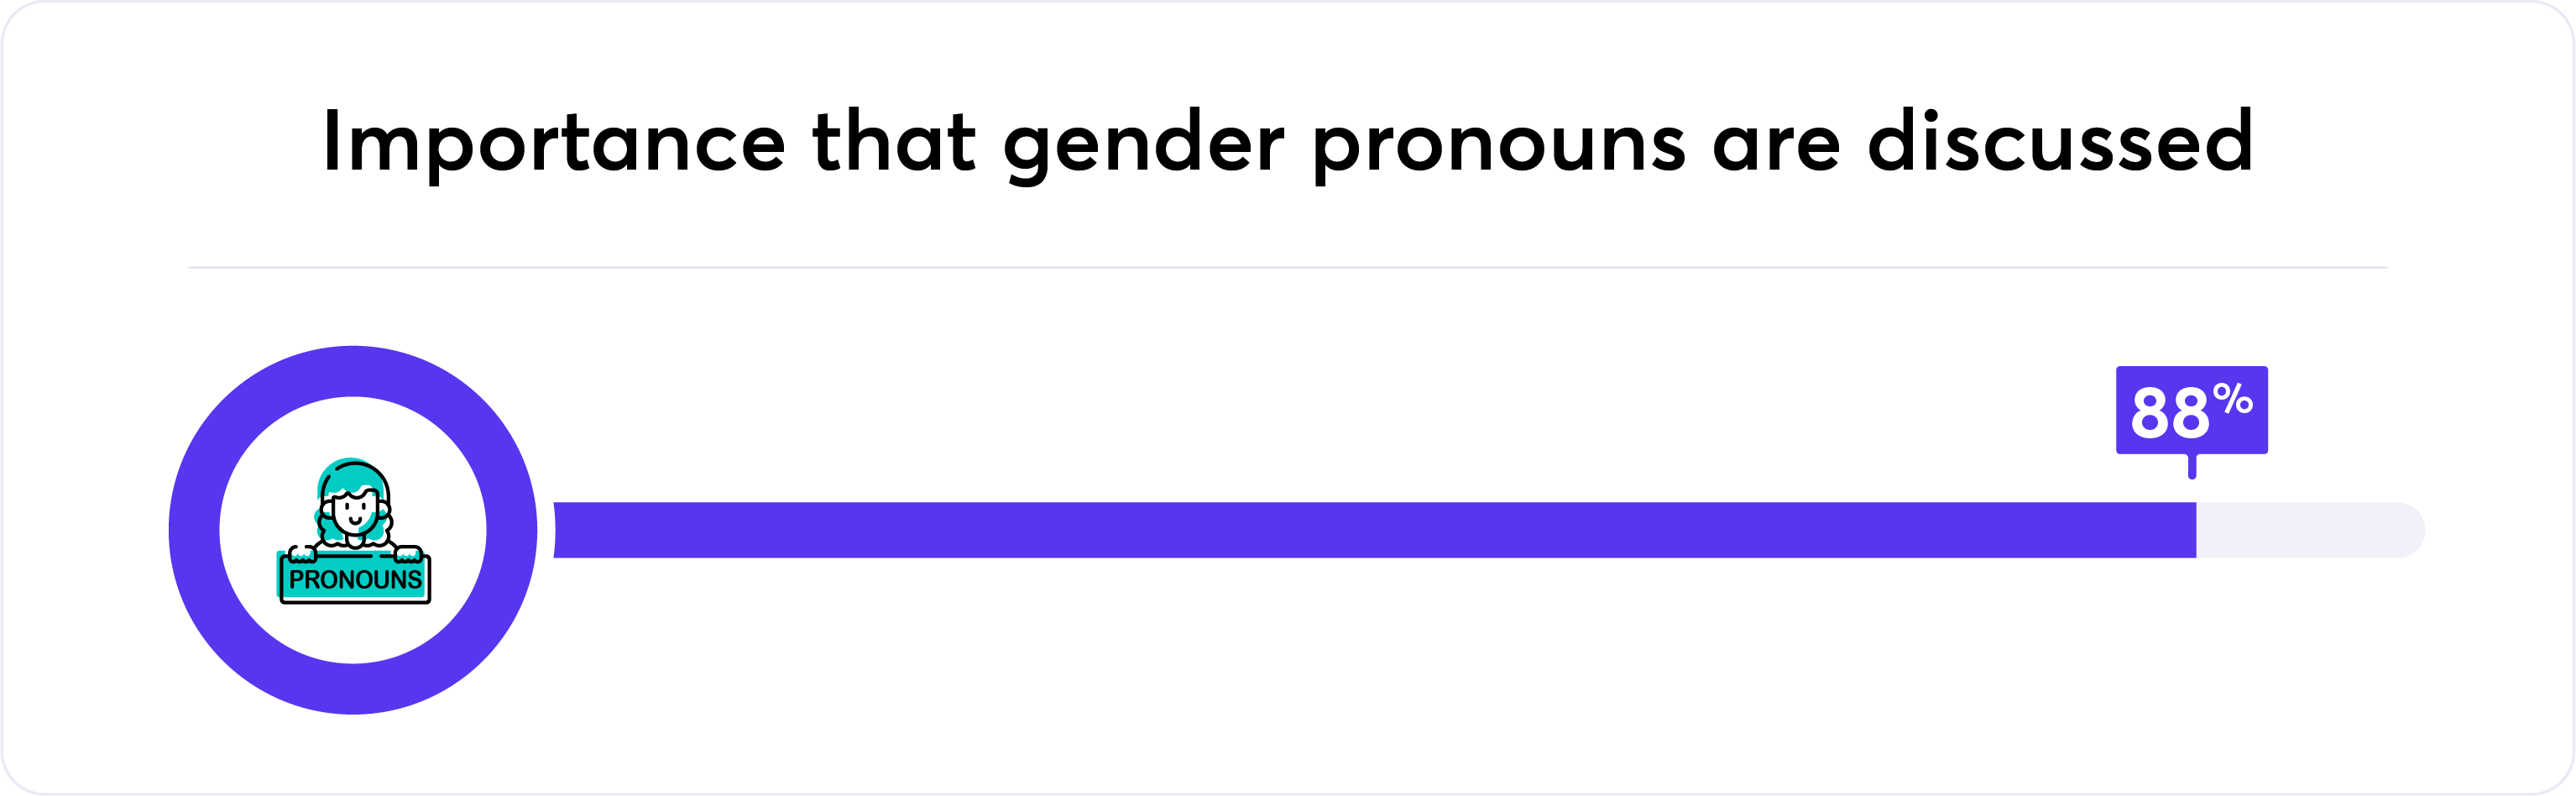 Importance that gender pronouns are discussed graphic